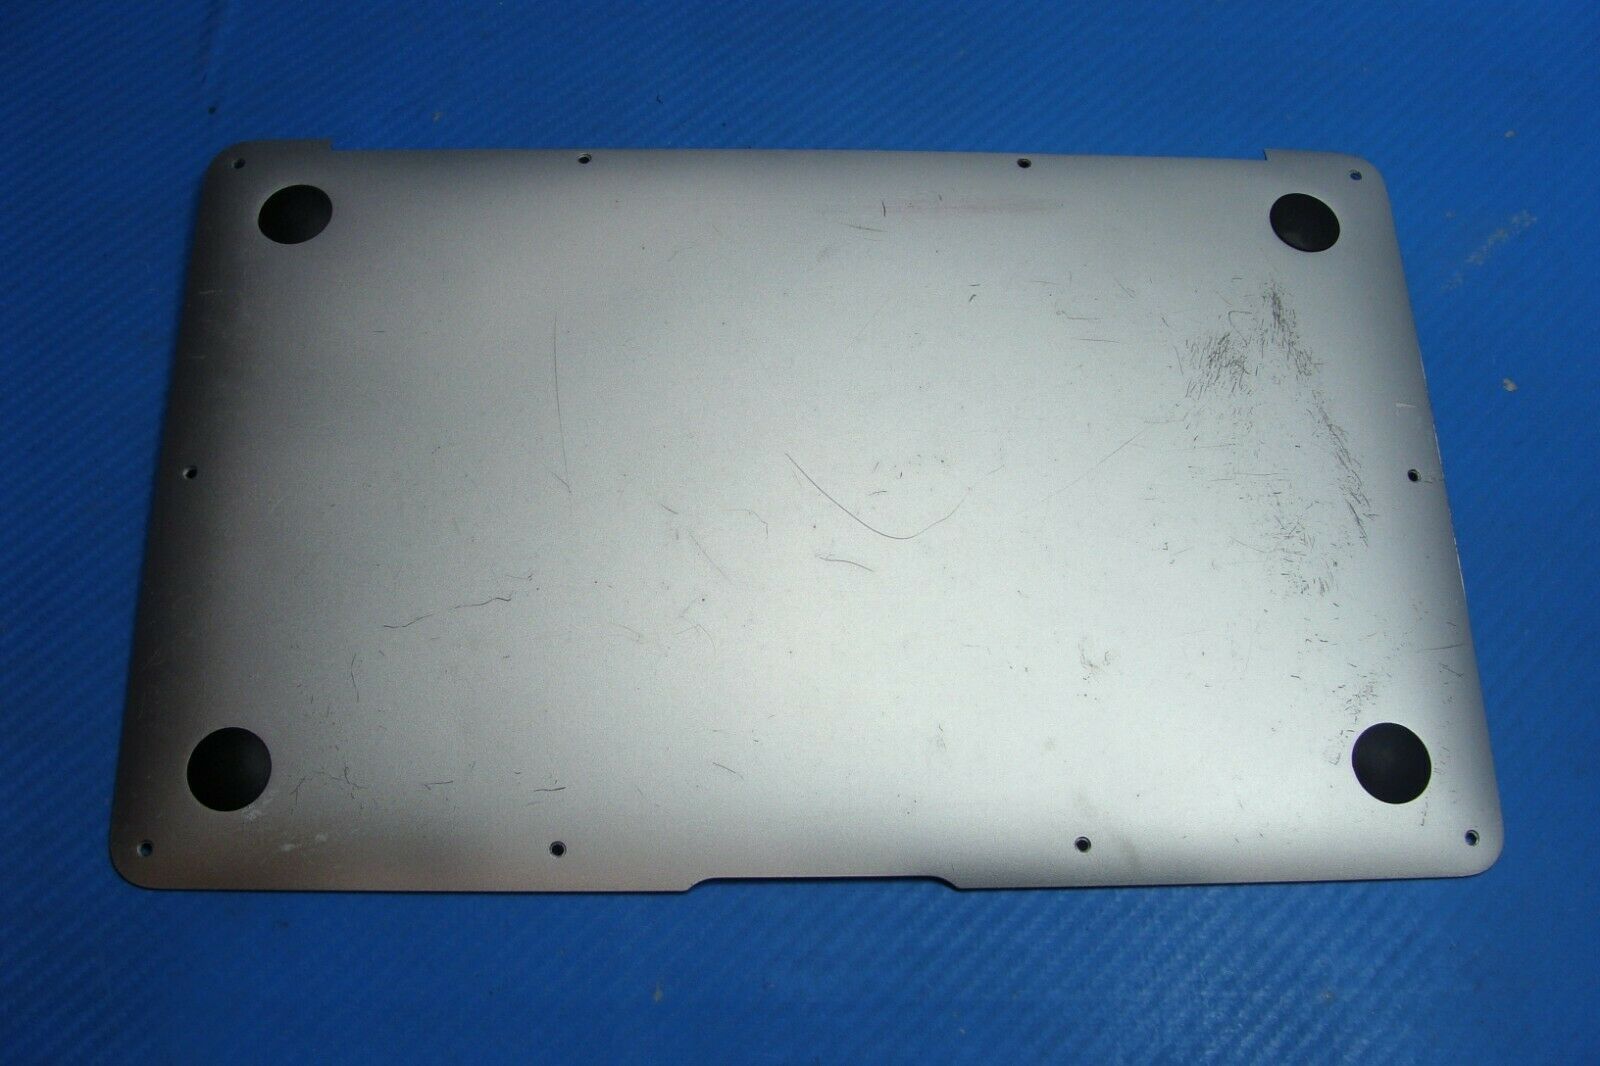 MacBook Air A1465 11" 2014 MD711LL/B Genuine Laptop Bottom Case 923-0436 - Laptop Parts - Buy Authentic Computer Parts - Top Seller Ebay